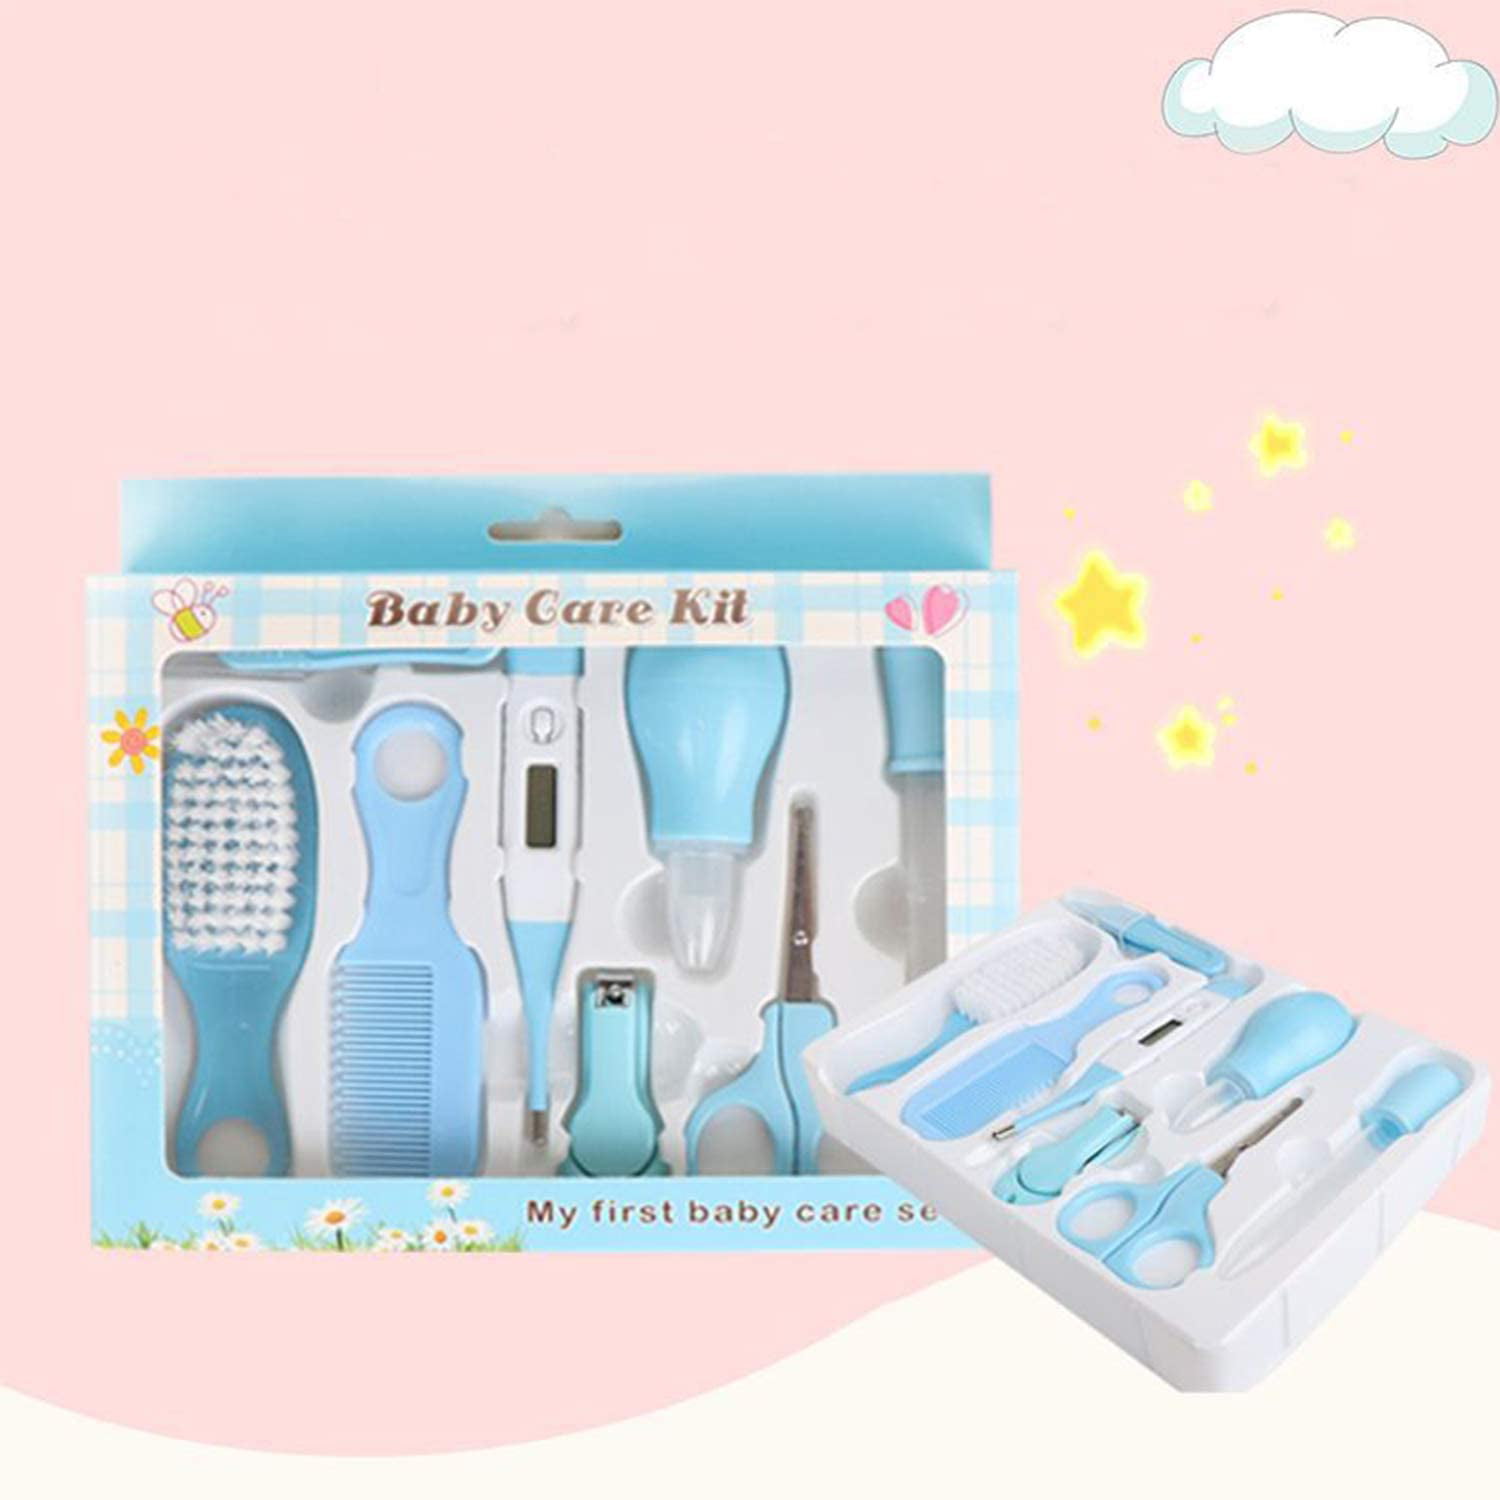 Baby Care Kit Newborn Infant Boy Nursery Red Cross Healthcare and Grooming Set 